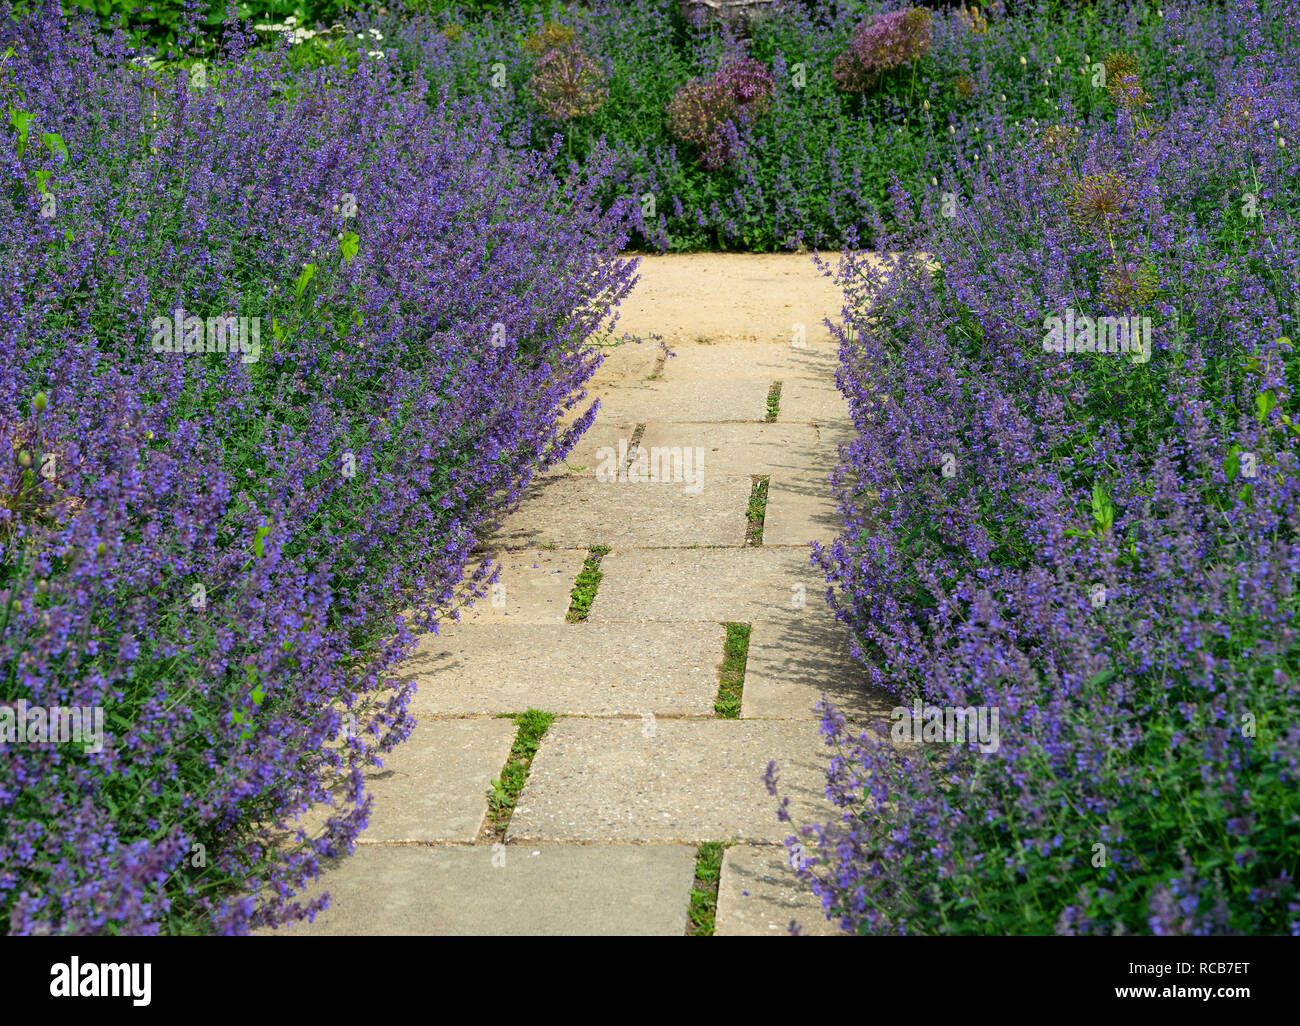 Garden border edged with two rows of purple flowering aromatic lavender, Sussex, England, UK Stock Photo